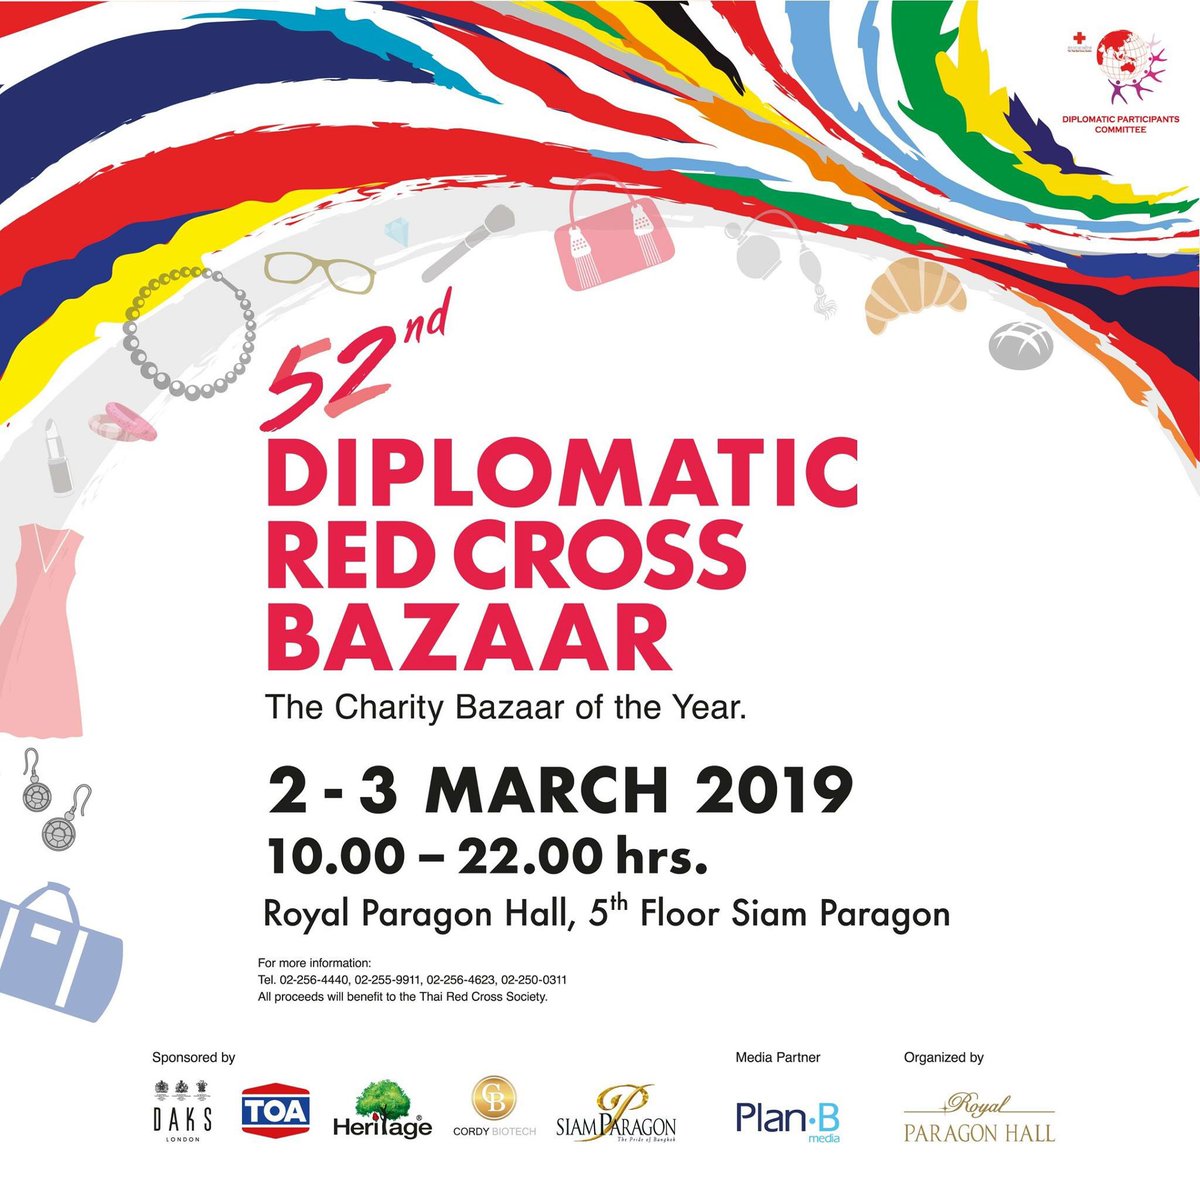 THE 52nd DIPLOMATIC RED CROSS BAZAAR